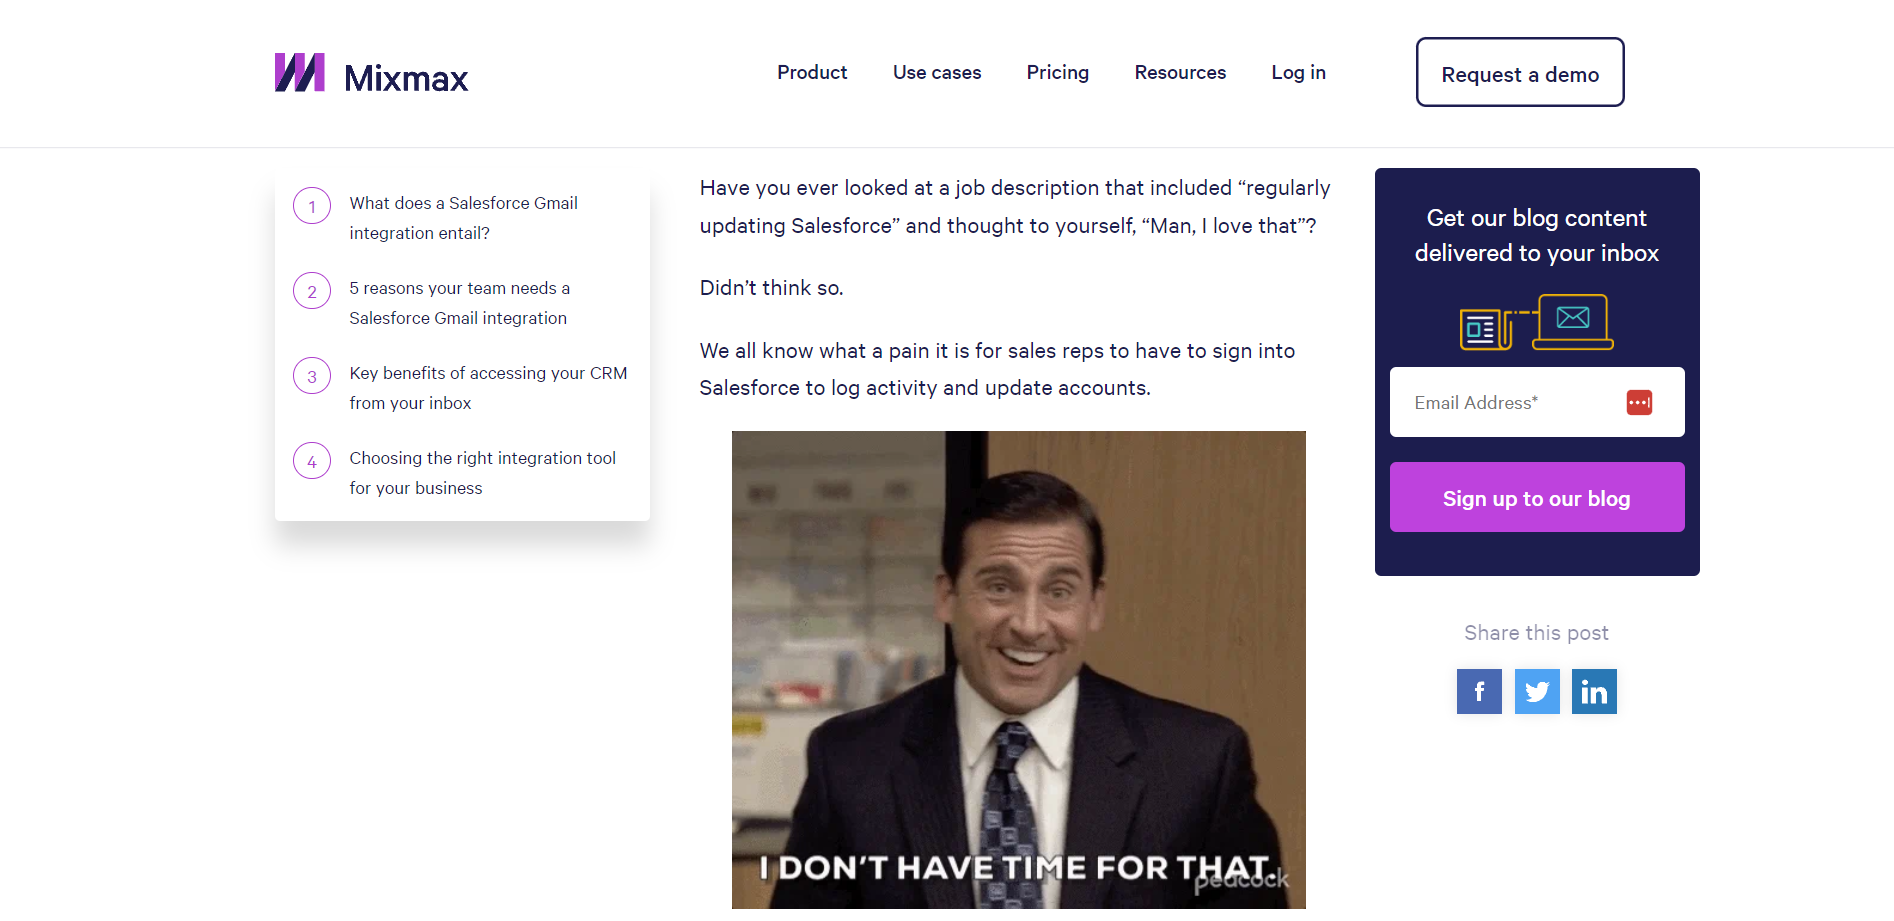  A Mixmax blog post uses a meme of Michael Scott from The Office to grab the attention of salespeople.